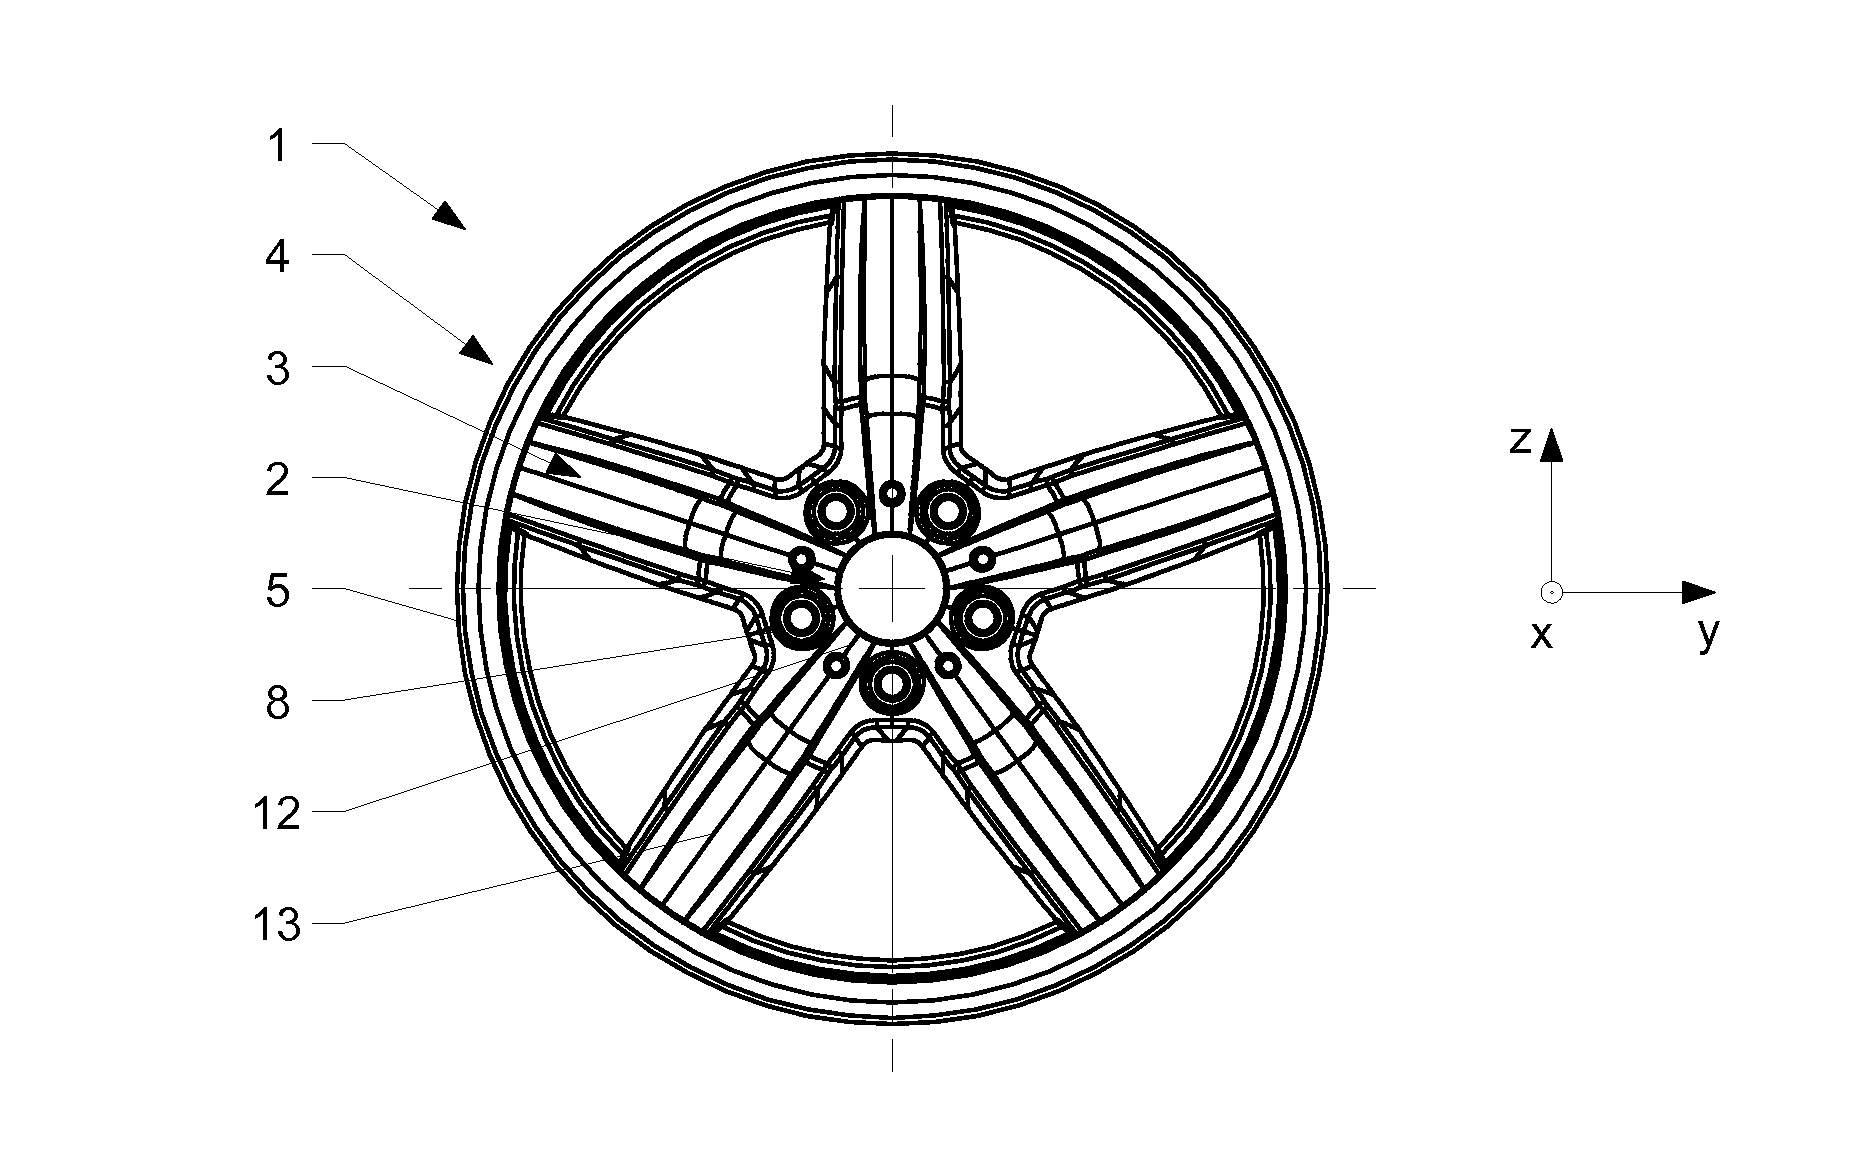 Wheel made out of fiber reinforced material and procedure to make an according wheel